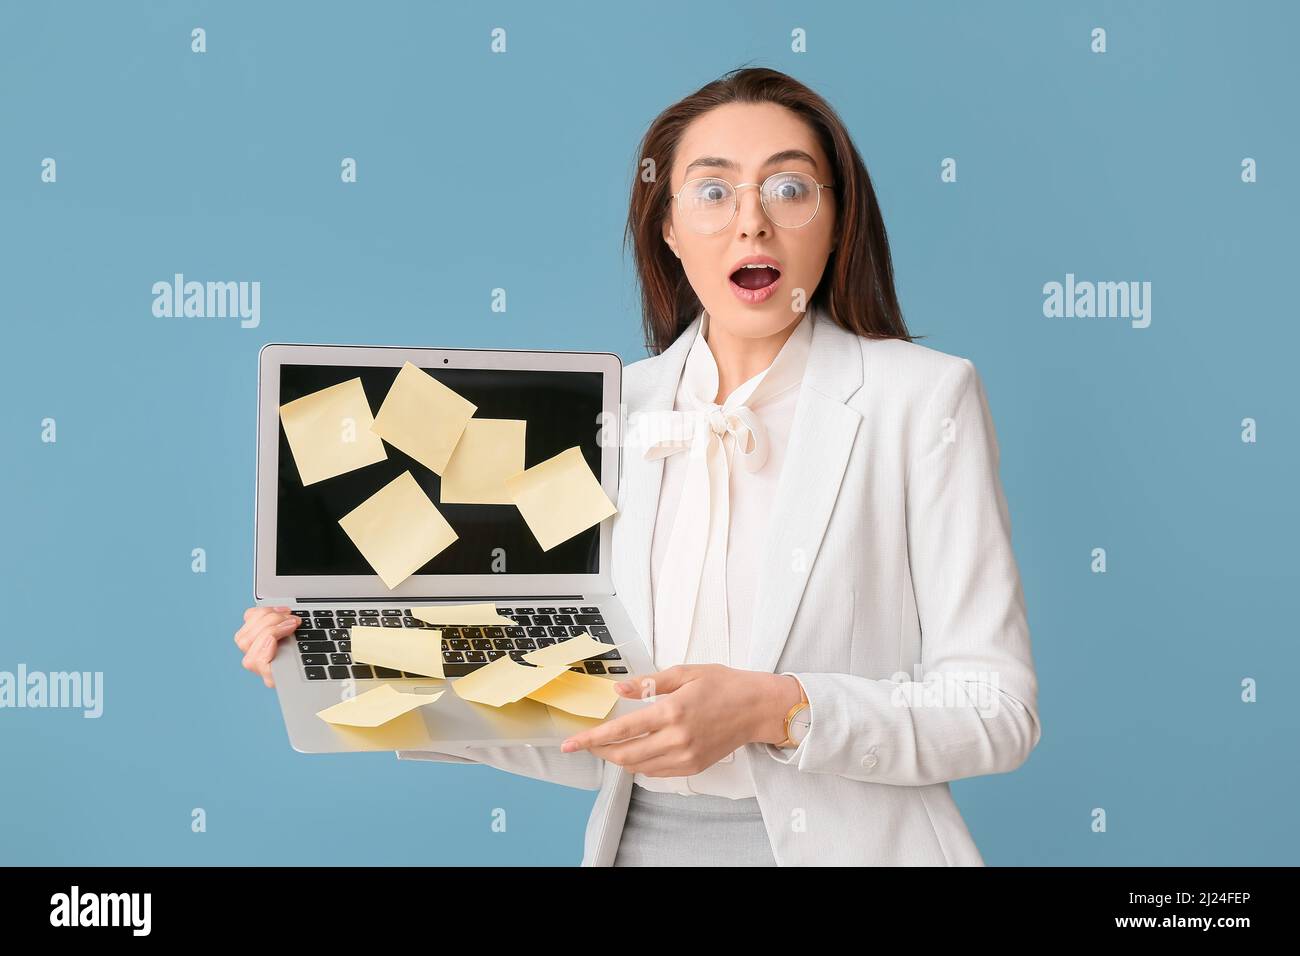 Surprised young woman with sticky note papers on laptop against blue background Stock Photo